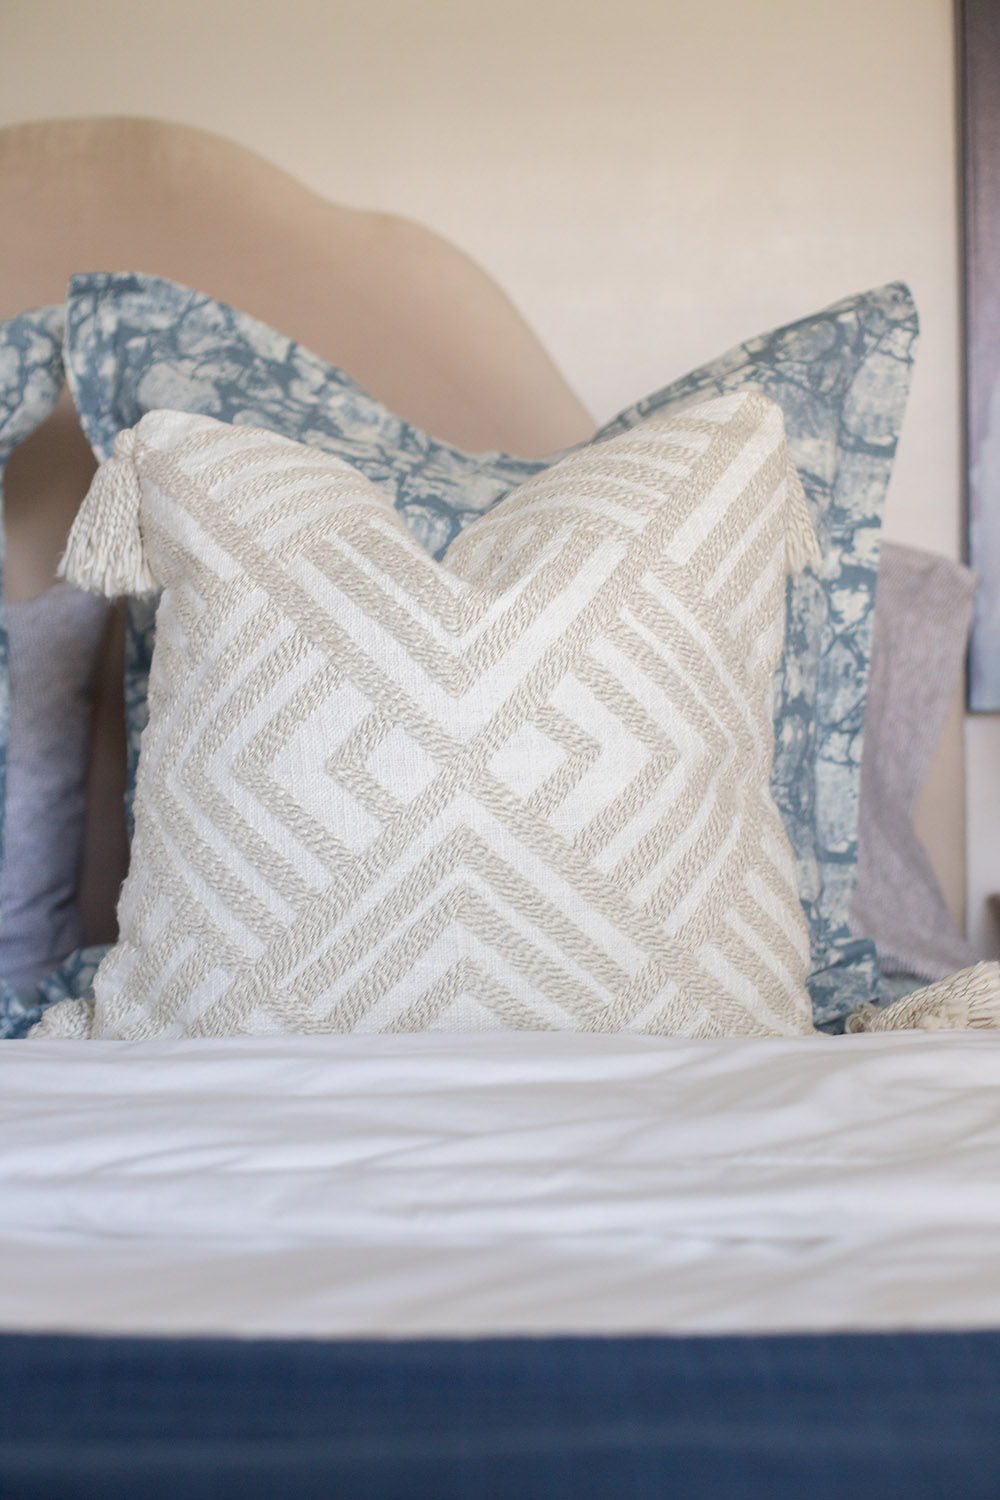 A pair of decorative pillows sitting on a bed.